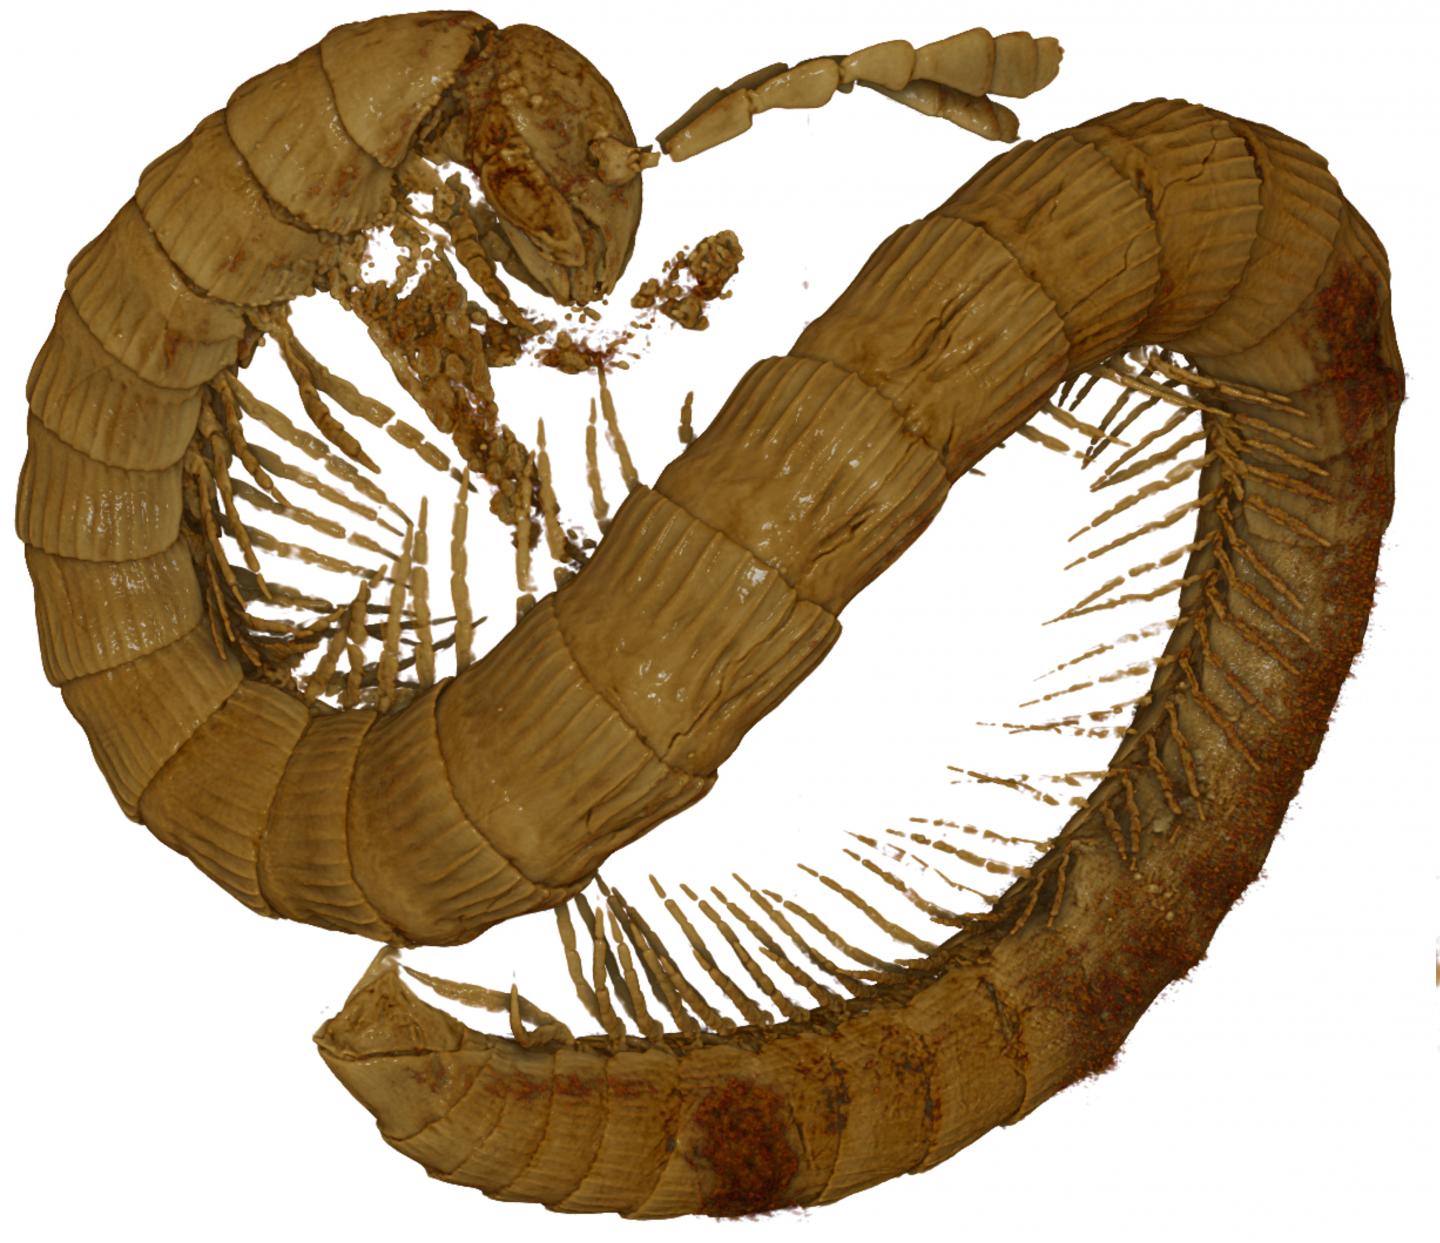 The Newly Described Millipede Rendered